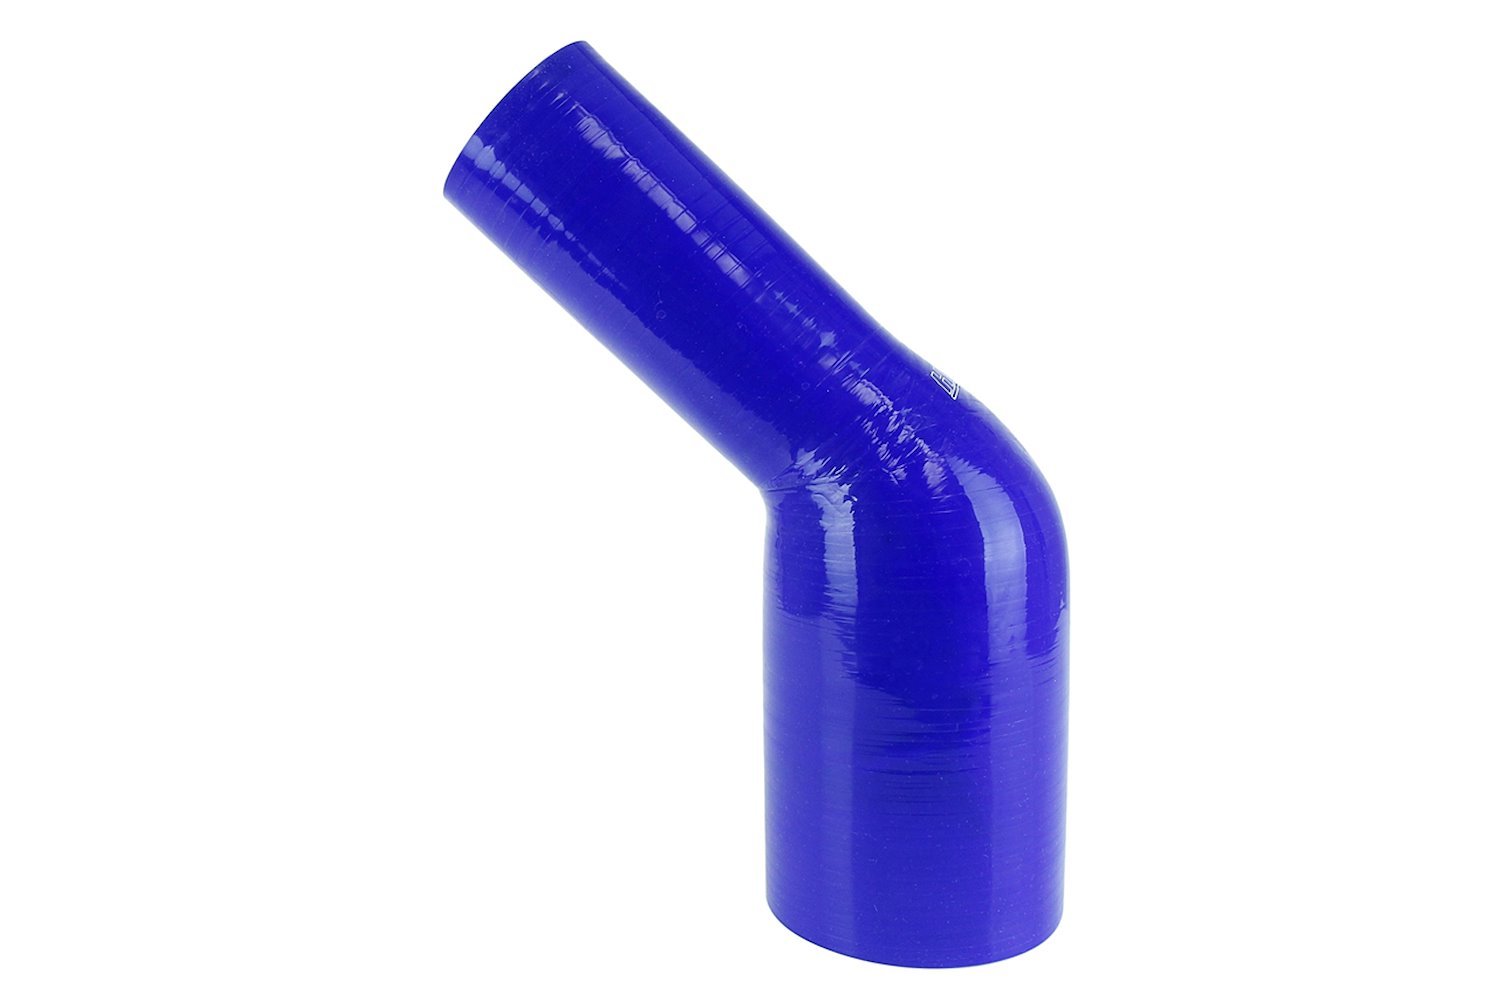 HTSER45-250-300-BLUE Silicone 45-Degree Elbow Hose, High-Temp 4-Ply Reinforced, 2-1/2 in. - 3 in. ID, Blue